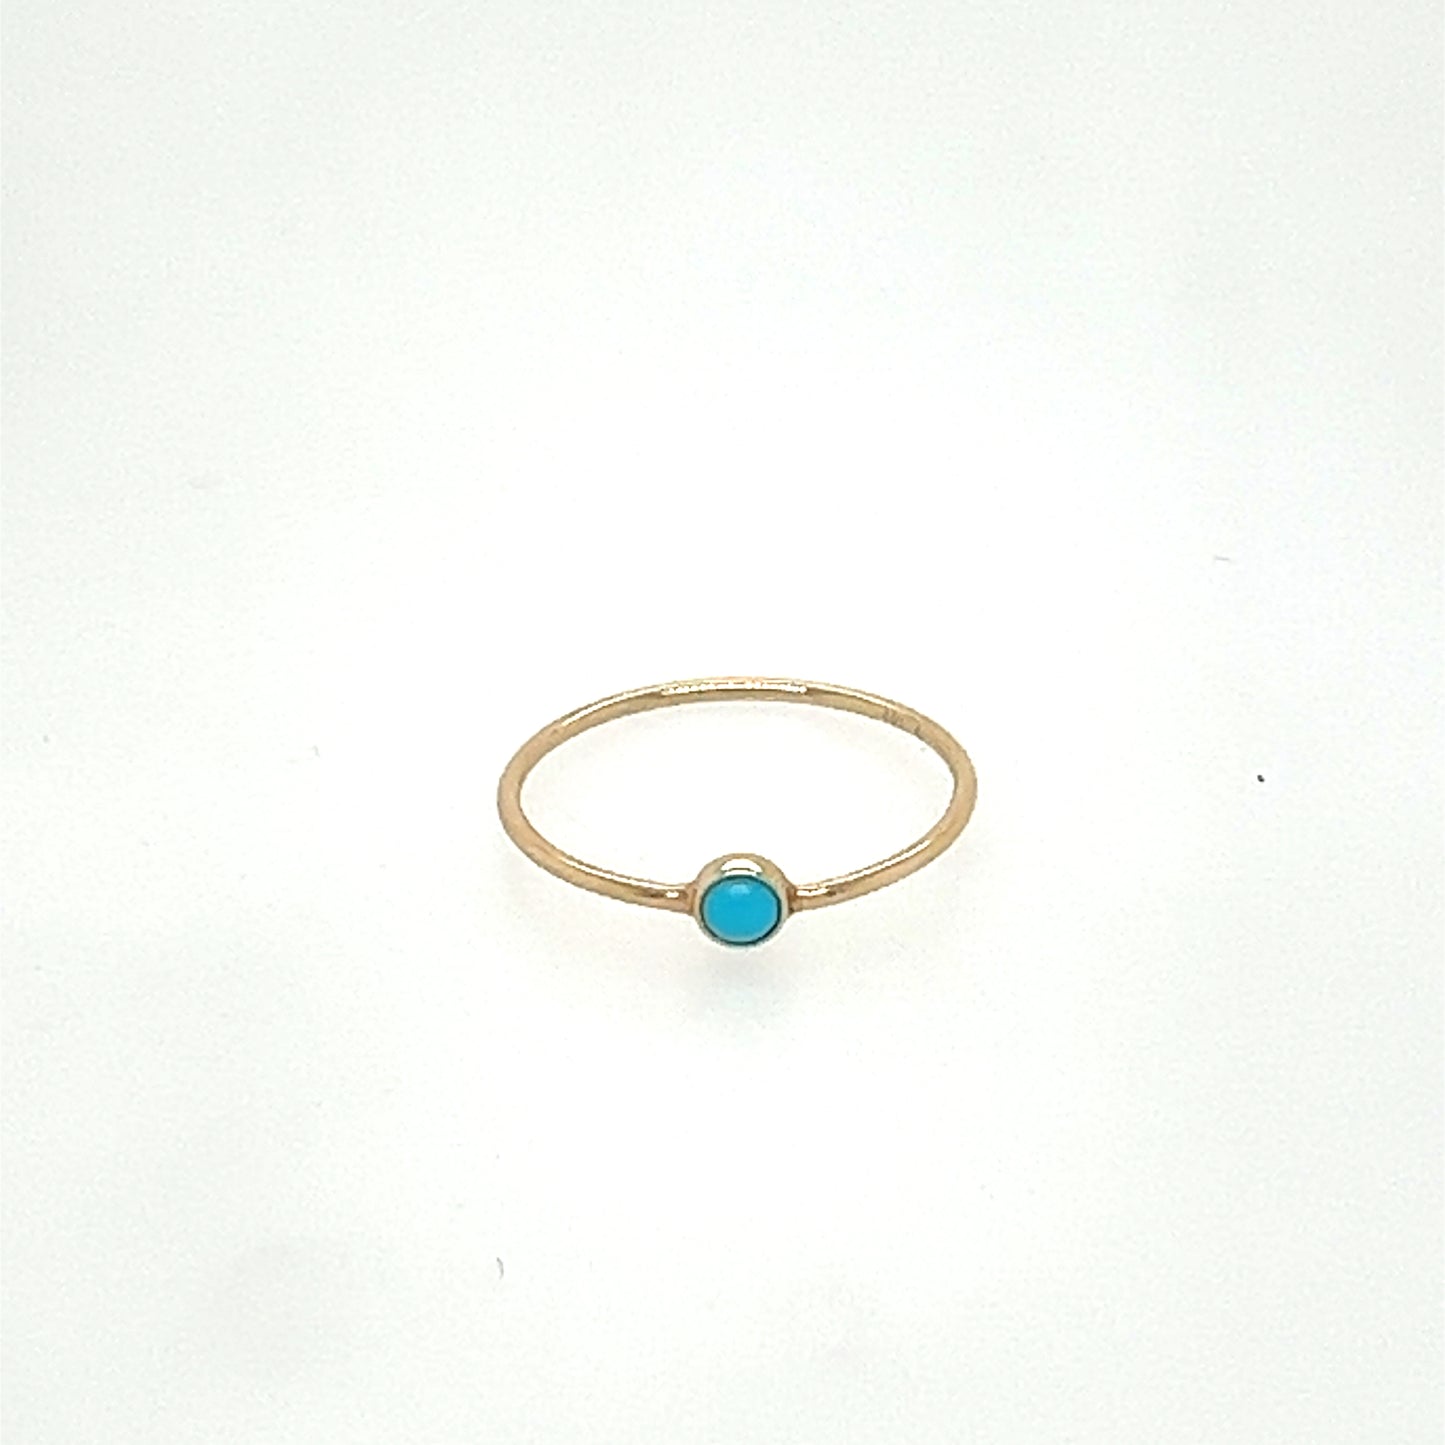 Zoë Chicco 14kt Gold Ring with 3mm Turquoise